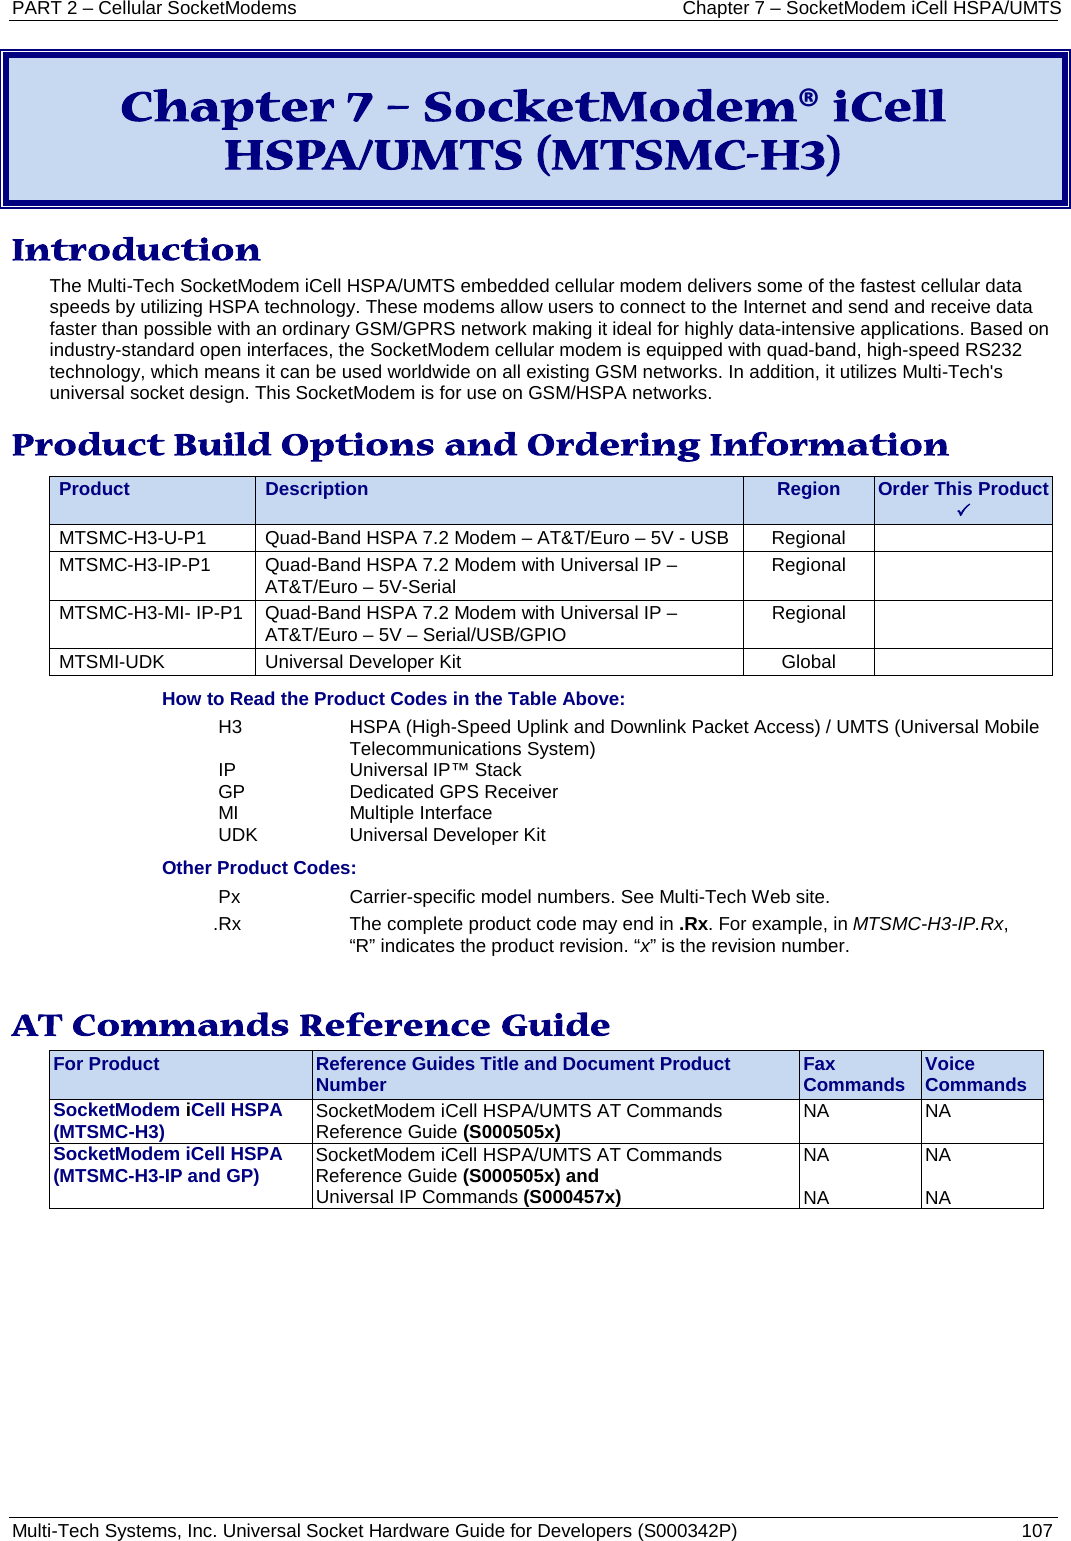 PART 2 – Cellular SocketModems Chapter 7 – SocketModem iCell HSPA/UMTS Multi-Tech Systems, Inc. Universal Socket Hardware Guide for Developers (S000342P)  107  Chapter 7 – SocketModem® iCell HSPA/UMTS (MTSMC-H3) Introduction The Multi-Tech SocketModem iCell HSPA/UMTS embedded cellular modem delivers some of the fastest cellular data speeds by utilizing HSPA technology. These modems allow users to connect to the Internet and send and receive data faster than possible with an ordinary GSM/GPRS network making it ideal for highly data-intensive applications. Based on industry-standard open interfaces, the SocketModem cellular modem is equipped with quad-band, high-speed RS232 technology, which means it can be used worldwide on all existing GSM networks. In addition, it utilizes Multi-Tech&apos;s universal socket design. This SocketModem is for use on GSM/HSPA networks.  Product Build Options and Ordering Information Product Description Region Order This Product  MTSMC-H3-U-P1  Quad-Band HSPA 7.2 Modem – AT&amp;T/Euro – 5V - USB   Regional   MTSMC-H3-IP-P1  Quad-Band HSPA 7.2 Modem with Universal IP – AT&amp;T/Euro – 5V-Serial Regional   MTSMC-H3-MI- IP-P1  Quad-Band HSPA 7.2 Modem with Universal IP – AT&amp;T/Euro – 5V – Serial/USB/GPIO  Regional   MTSMI-UDK Universal Developer Kit Global   How to Read the Product Codes in the Table Above: H3  HSPA (High-Speed Uplink and Downlink Packet Access) / UMTS (Universal Mobile  Telecommunications System) IP Universal IP™ Stack GP Dedicated GPS Receiver MI Multiple Interface UDK Universal Developer Kit Other Product Codes: Px  Carrier-specific model numbers. See Multi-Tech Web site. .Rx The complete product code may end in .Rx. For example, in MTSMC-H3-IP.Rx, “R” indicates the product revision. “x” is the revision number.  AT Commands Reference Guide For Product Reference Guides Title and Document Product Number Fax Commands Voice Commands SocketModem iCell HSPA (MTSMC-H3) SocketModem iCell HSPA/UMTS AT Commands Reference Guide (S000505x) NA NA SocketModem iCell HSPA (MTSMC-H3-IP and GP) SocketModem iCell HSPA/UMTS AT Commands Reference Guide (S000505x) and Universal IP Commands (S000457x) NA  NA NA  NA    